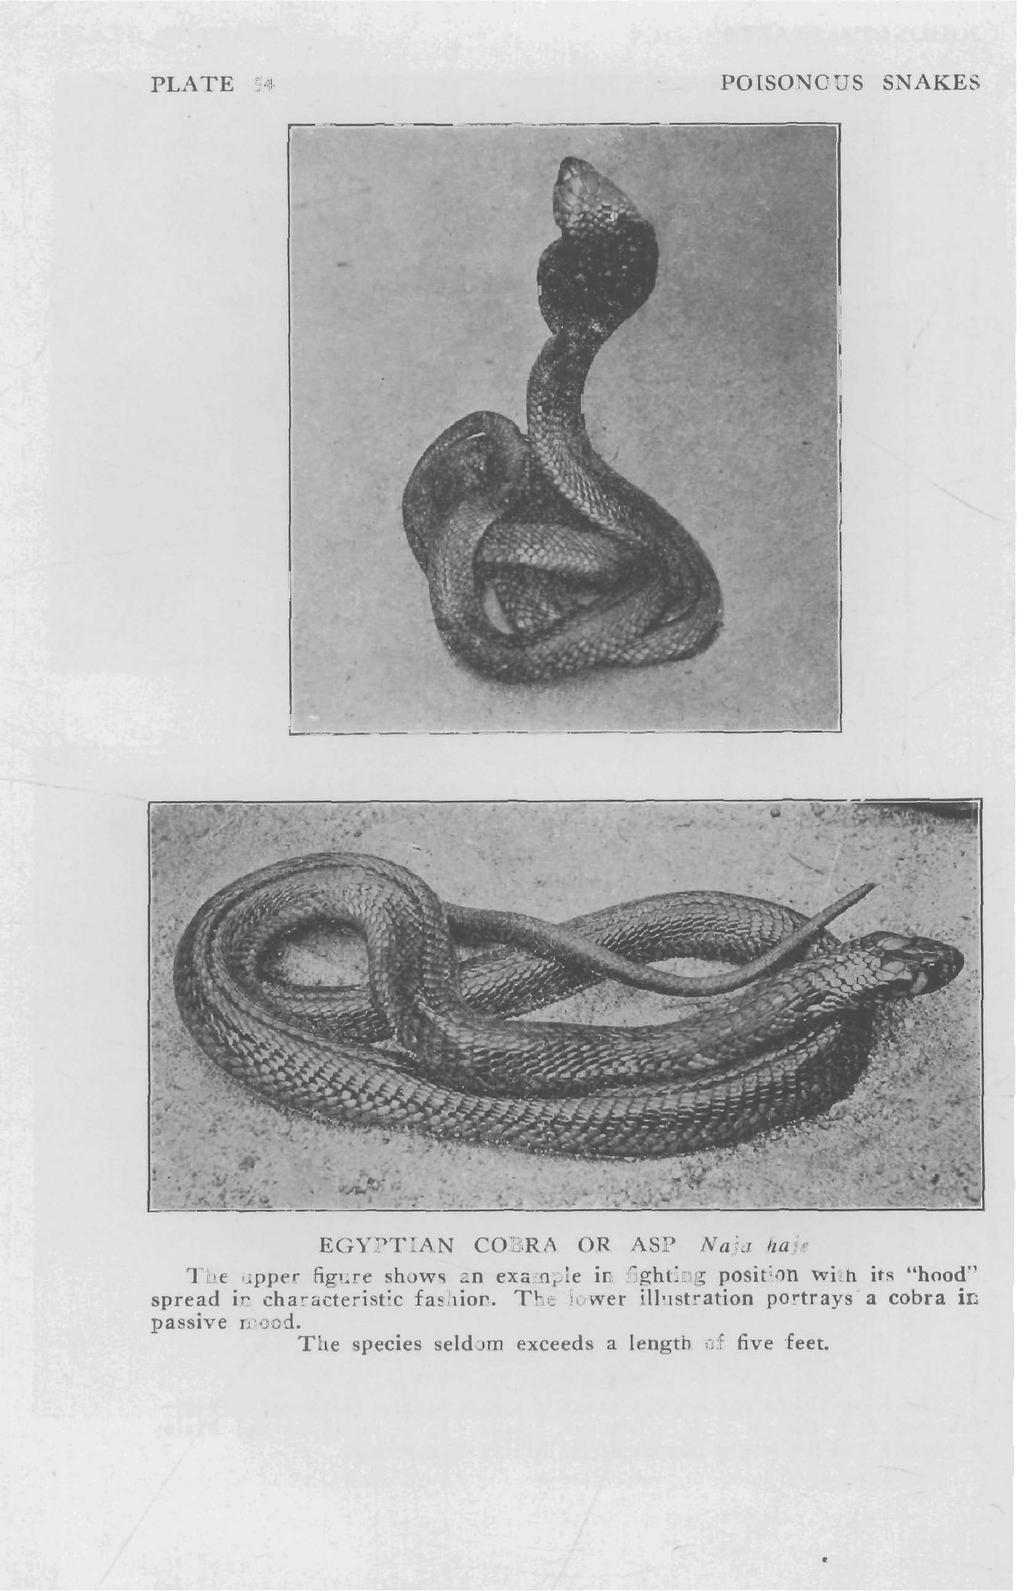 PLATE 54 POISONOUS SNAKES EGYPTIAN COBRA OR ASP Naja ha;e The upper figure shows an example in fighting position with its "hood" spread